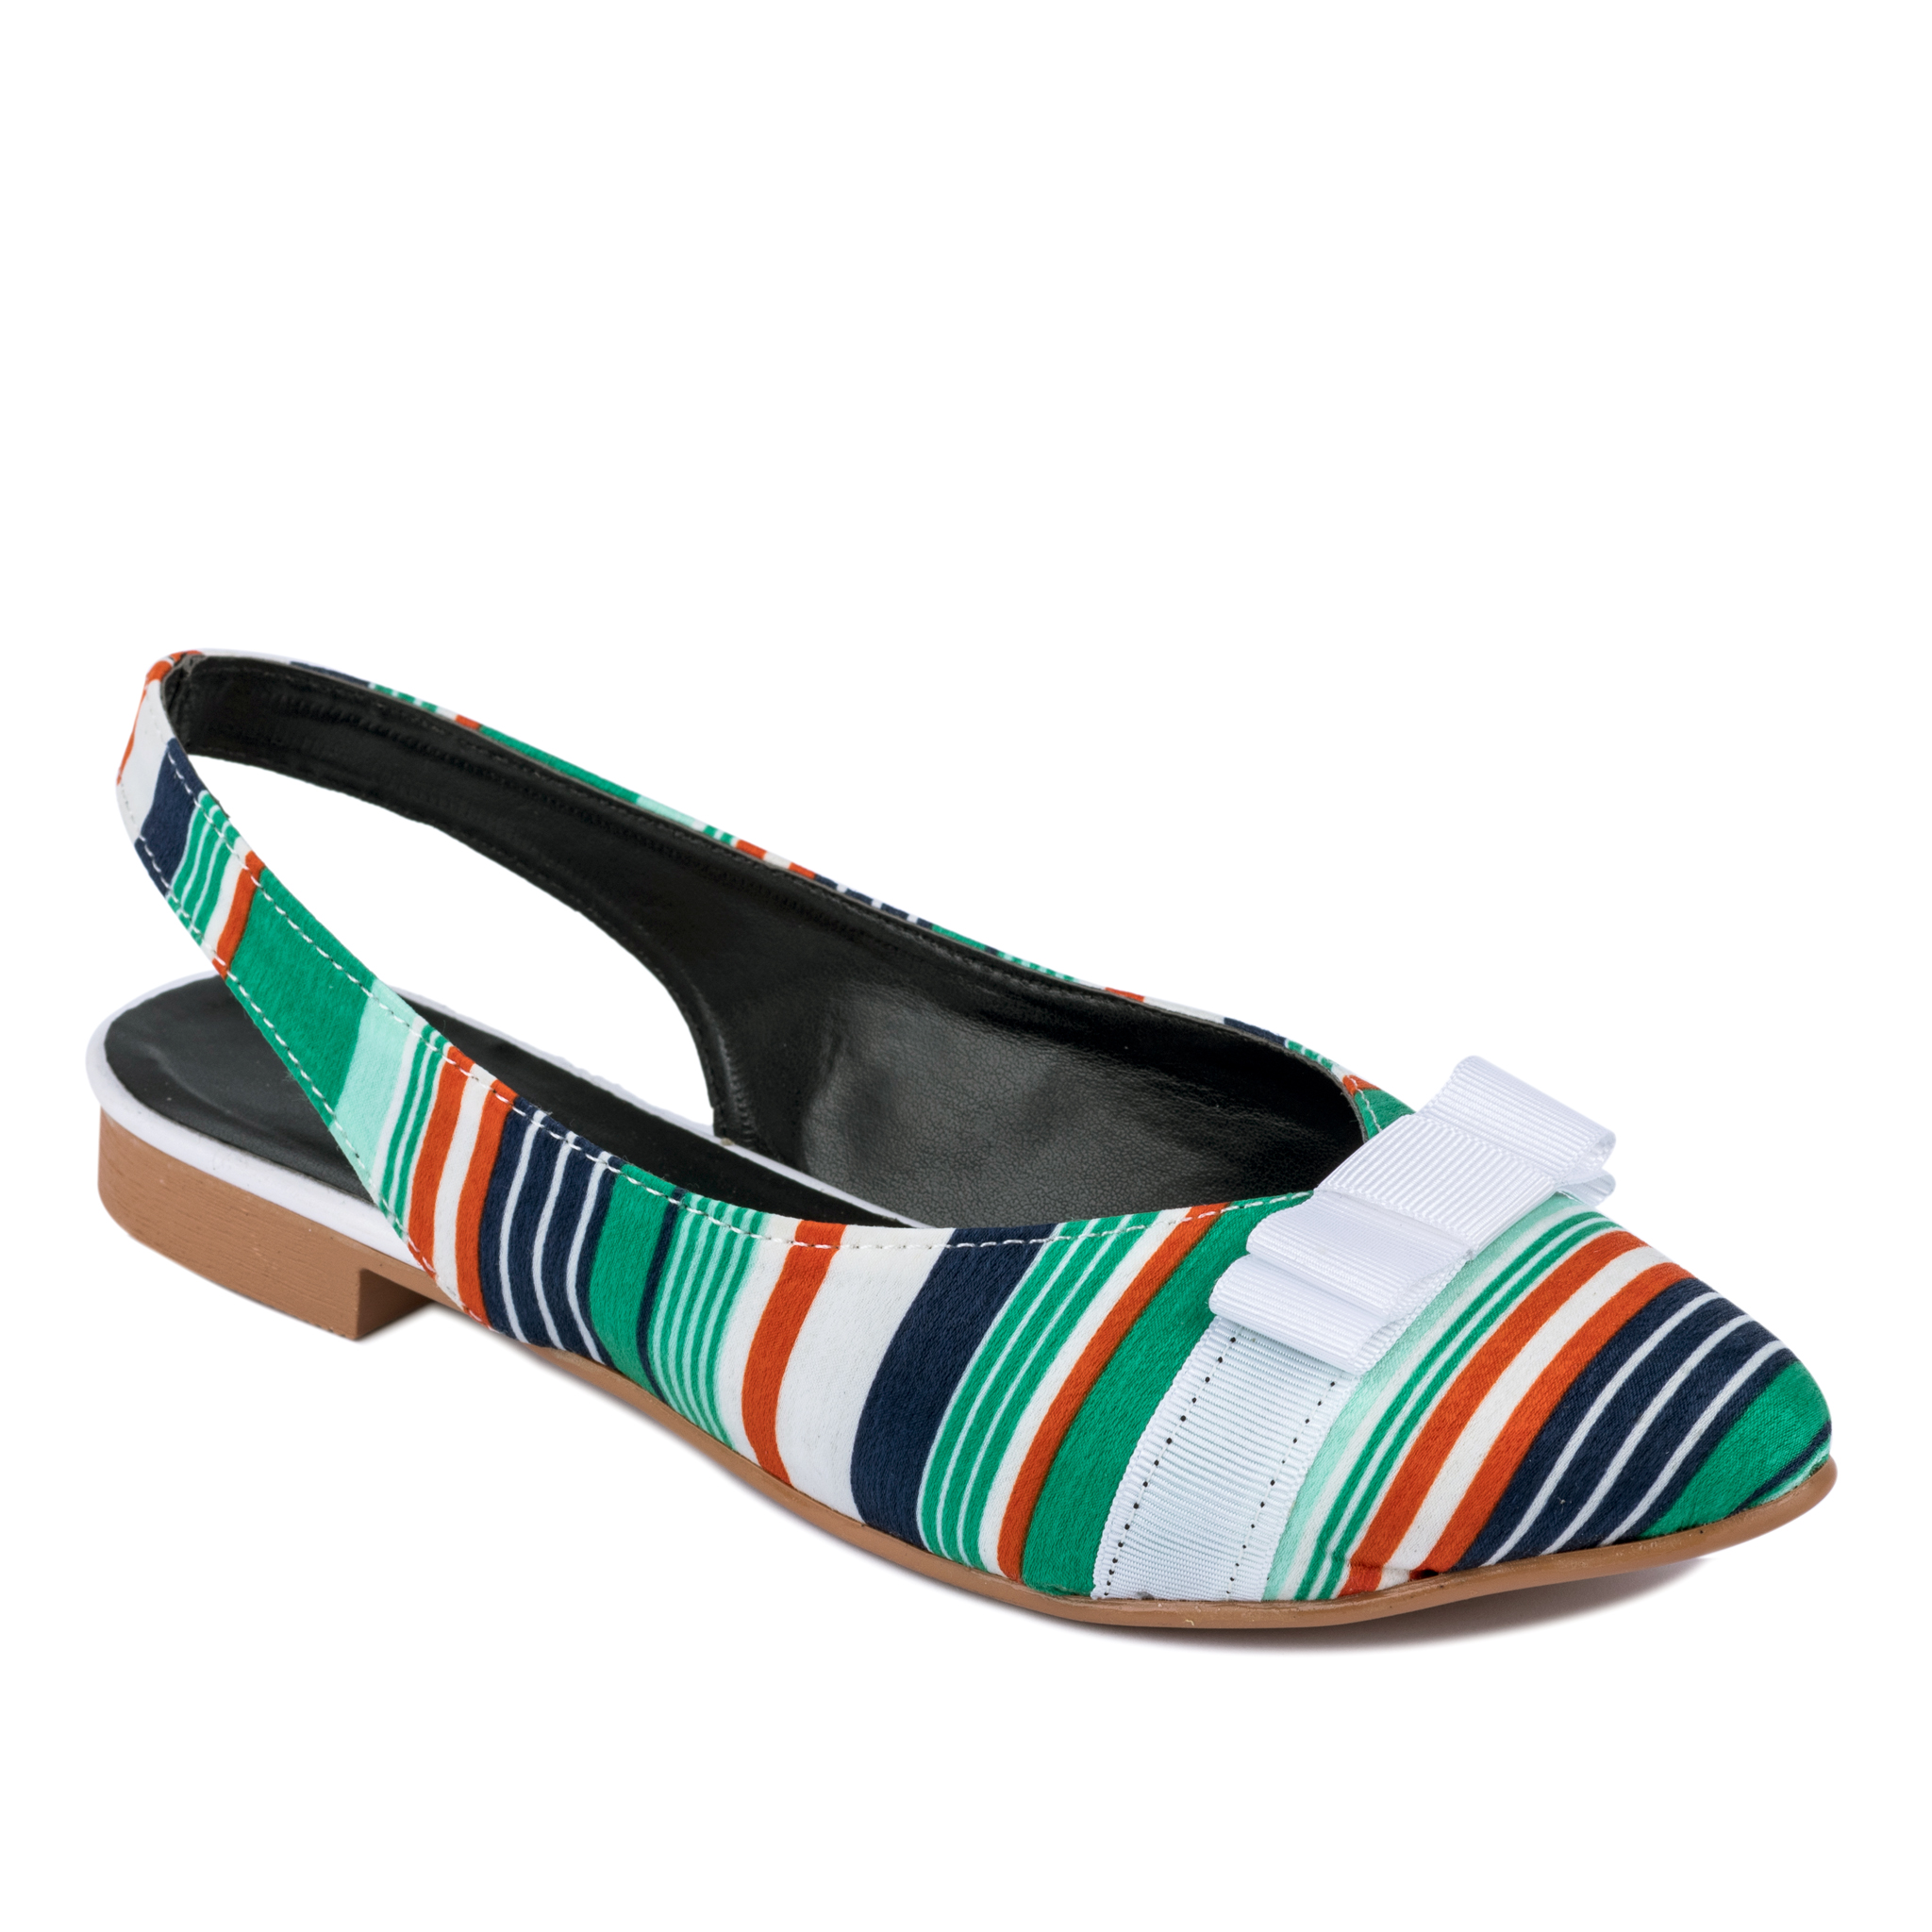 STRIPED FLATS WITH BOW - GREEN